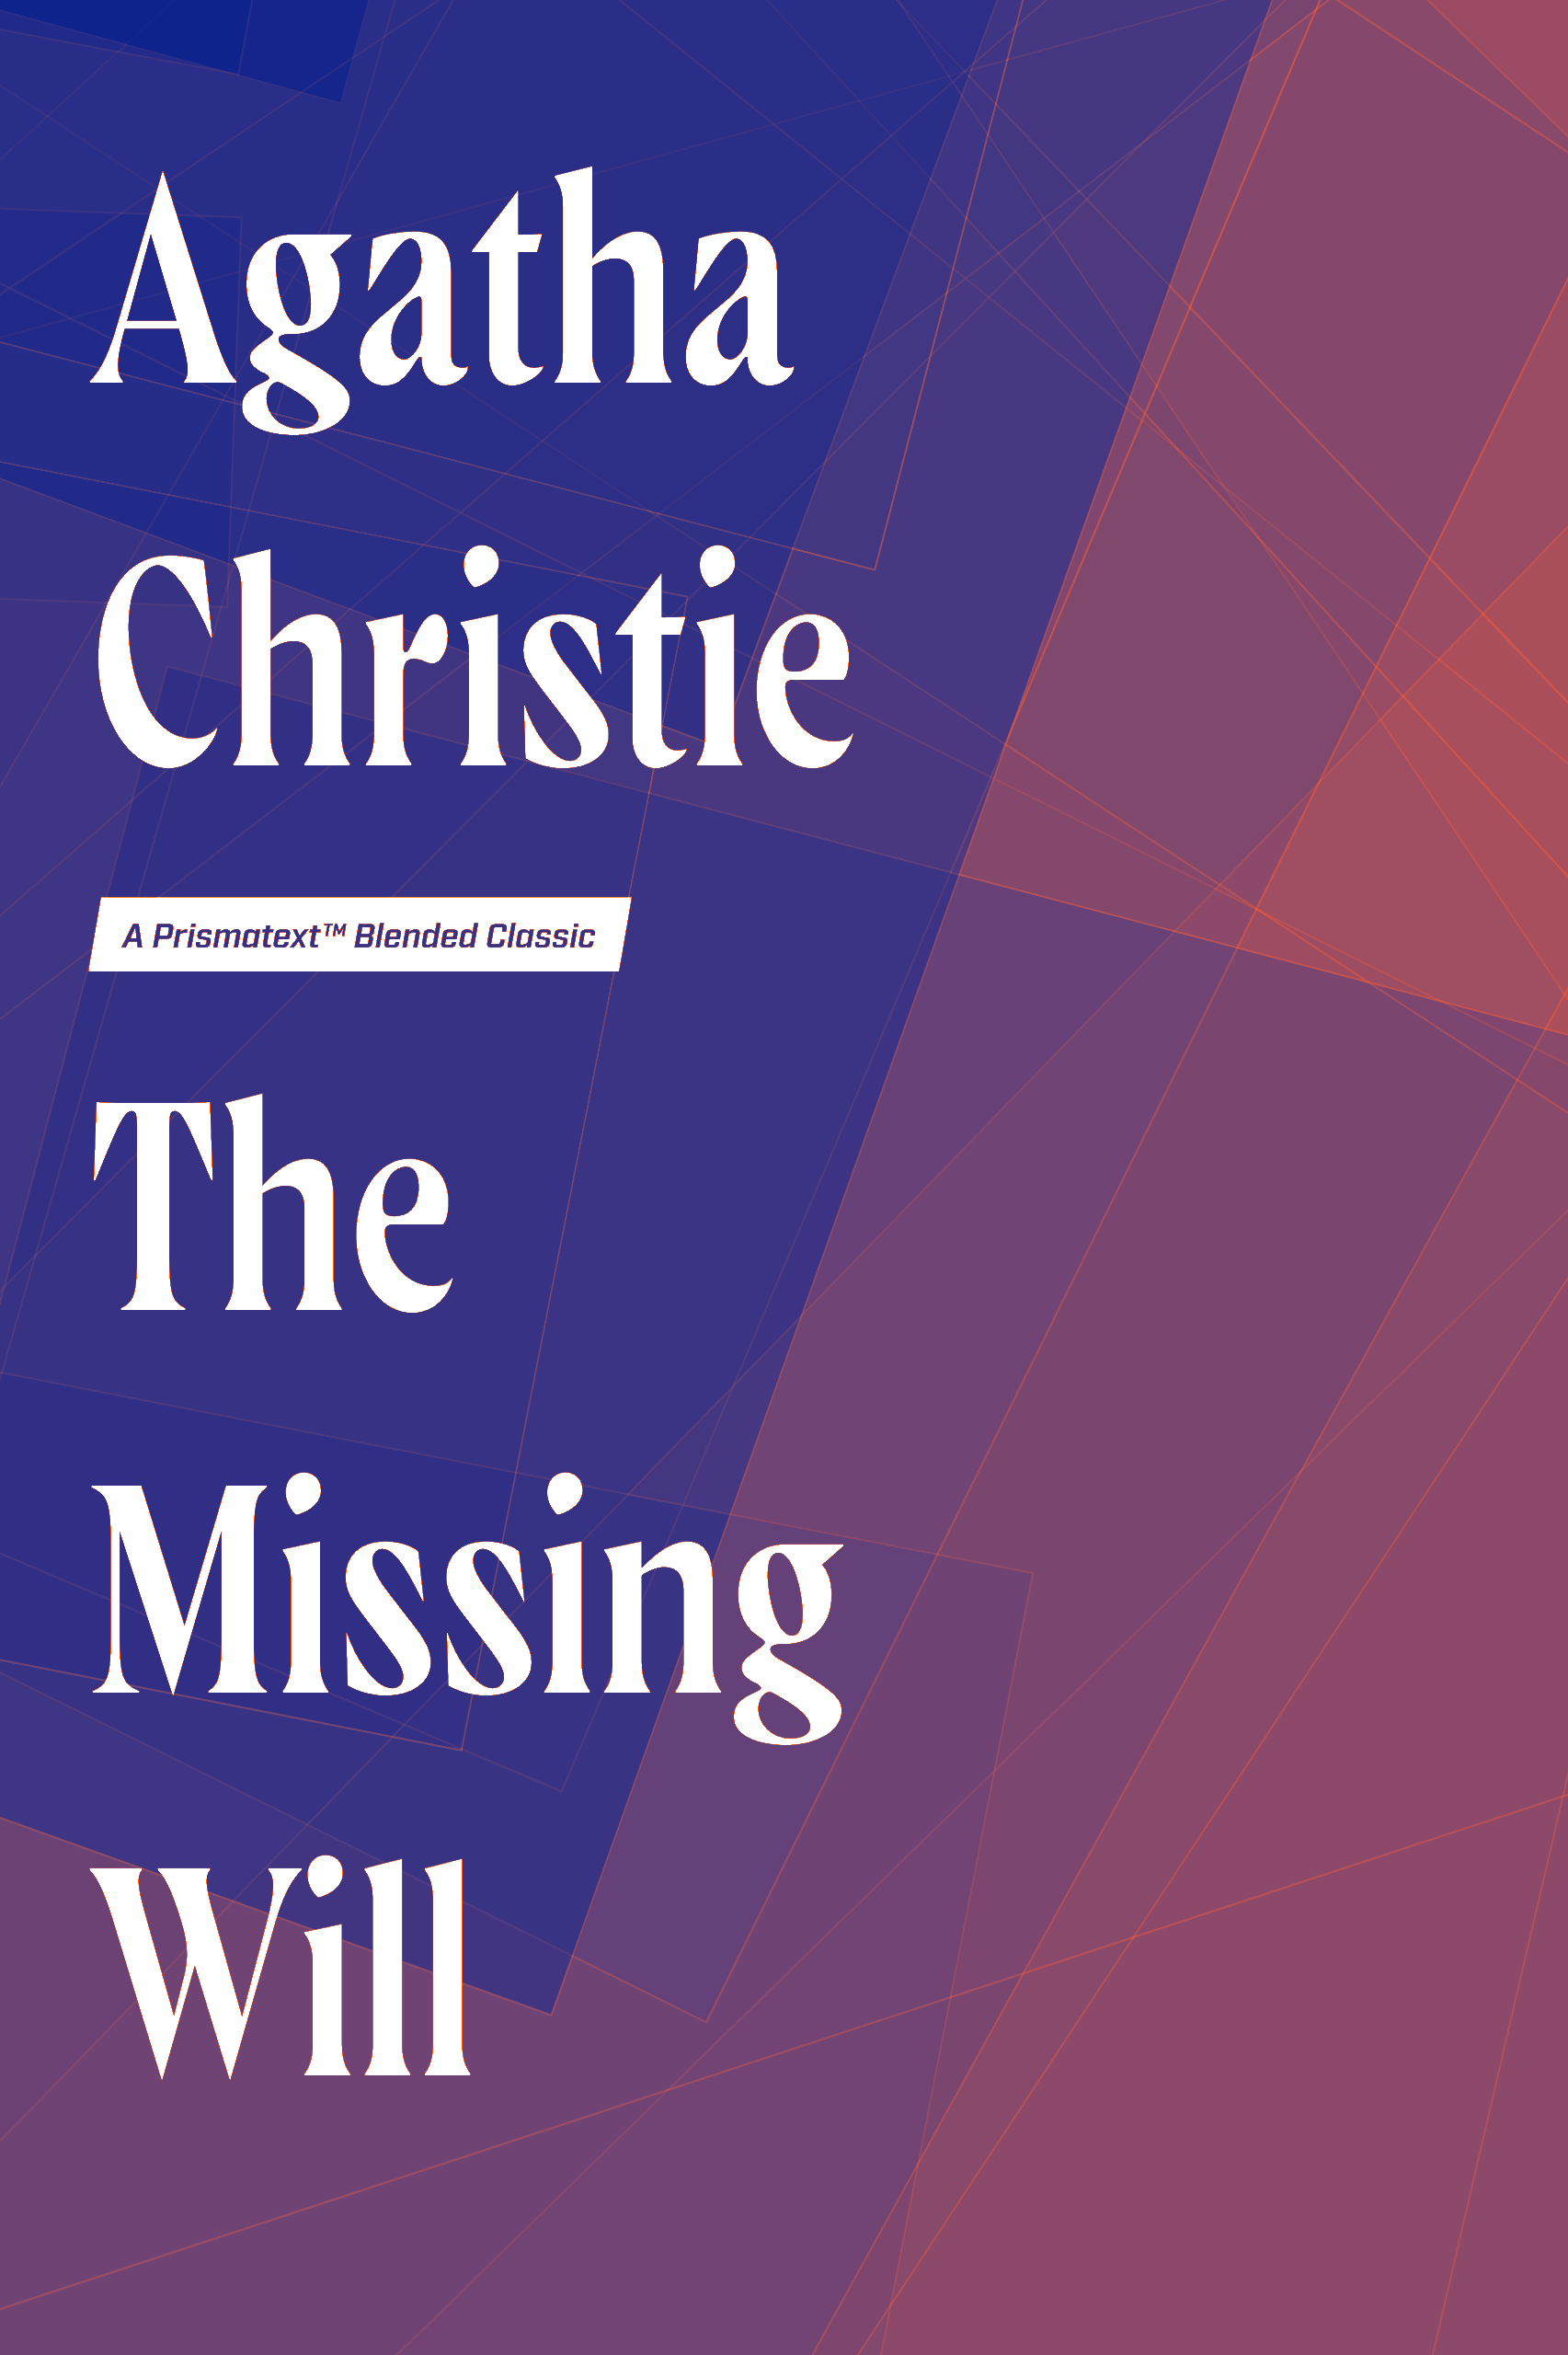 The Missing Will by Agatha Christie